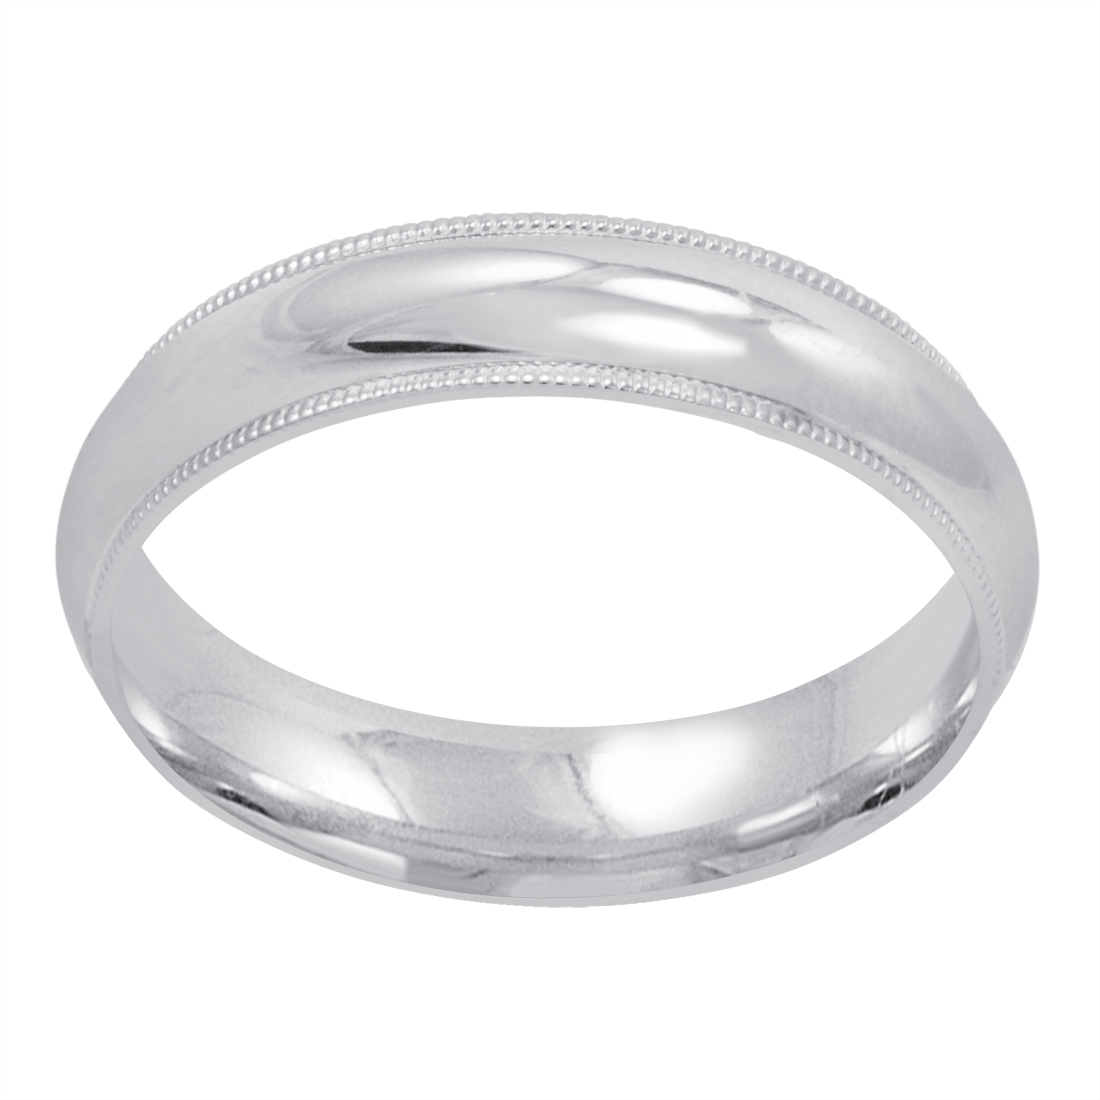 Oxford Ivy Men's 10K Yellow or White Gold 5mm Comfort Fit Milgrain Wedding Band  (Available Ring Sizes 8-12 1/2)